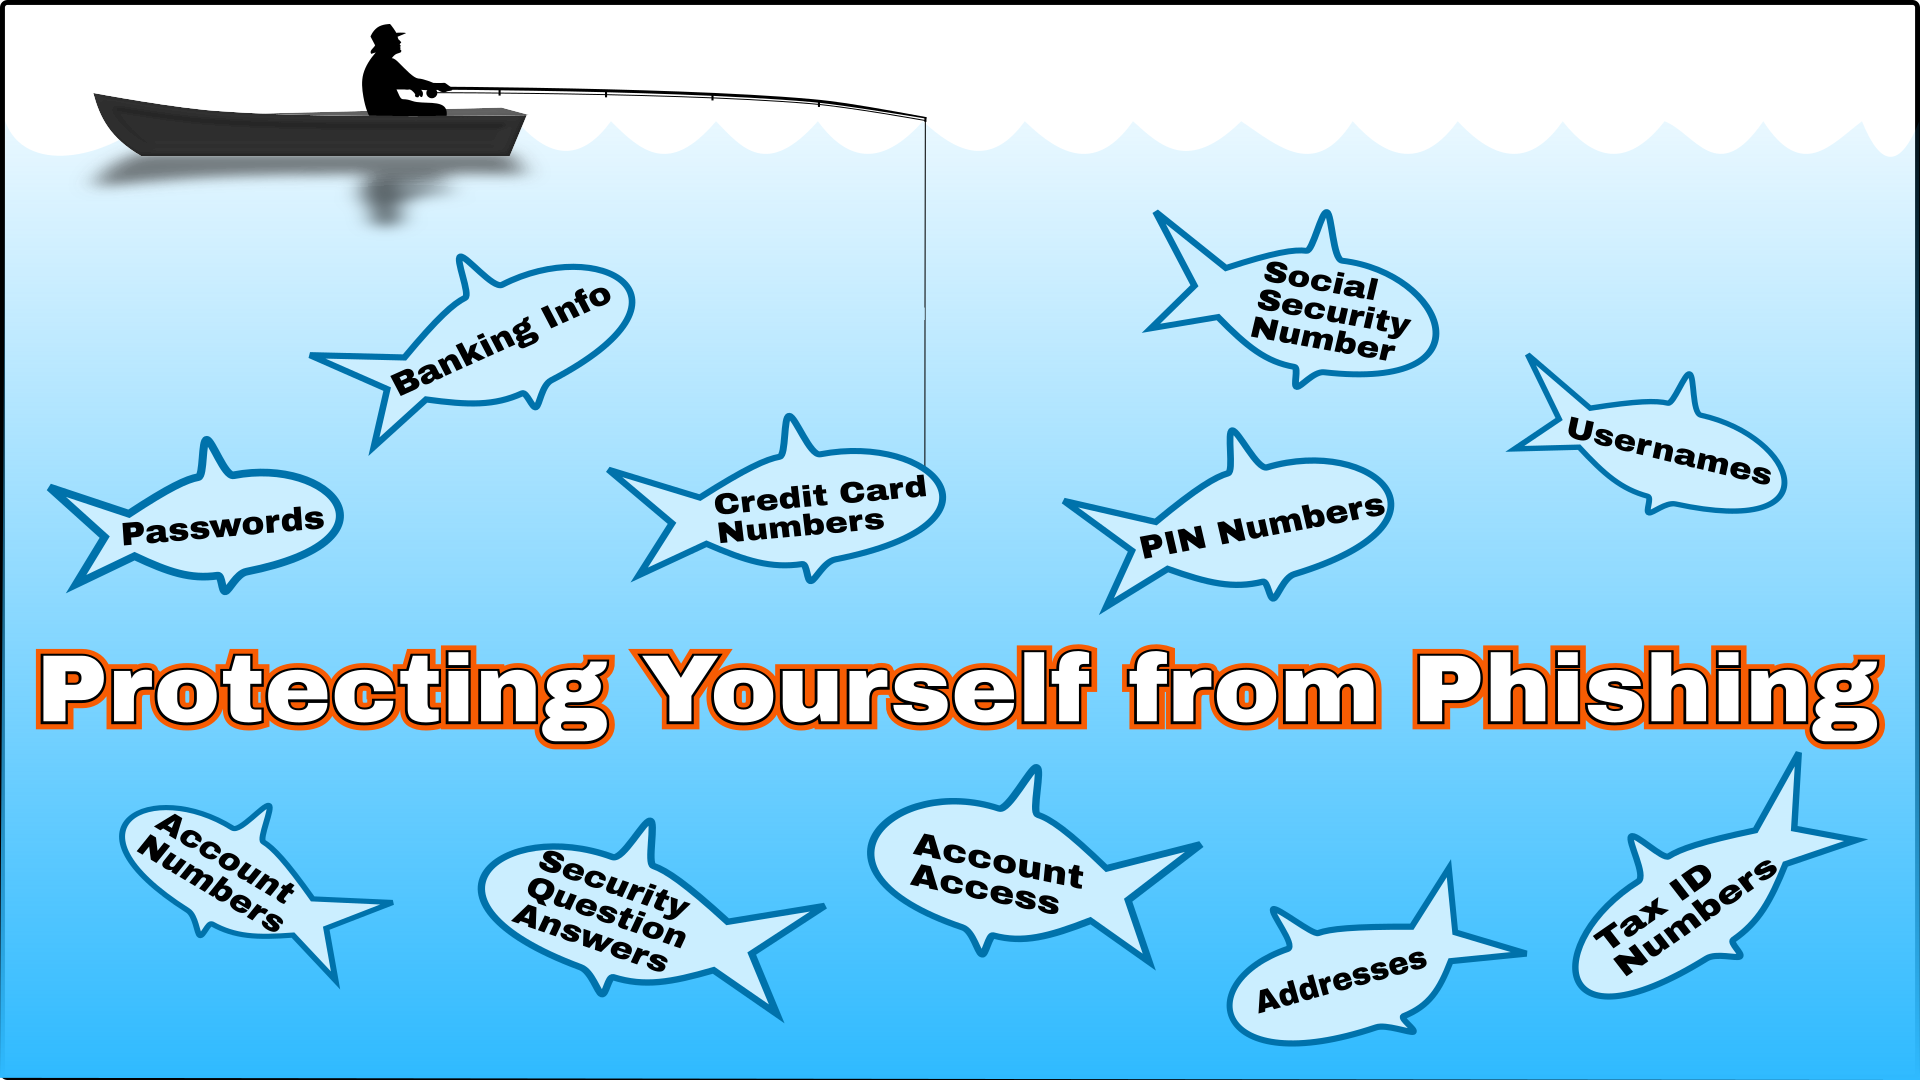 The text 'Protect Yourself from Phishing' under water, surrounded by fish outlines with personal information on them, and a silhouette of someone phishing from a boat.